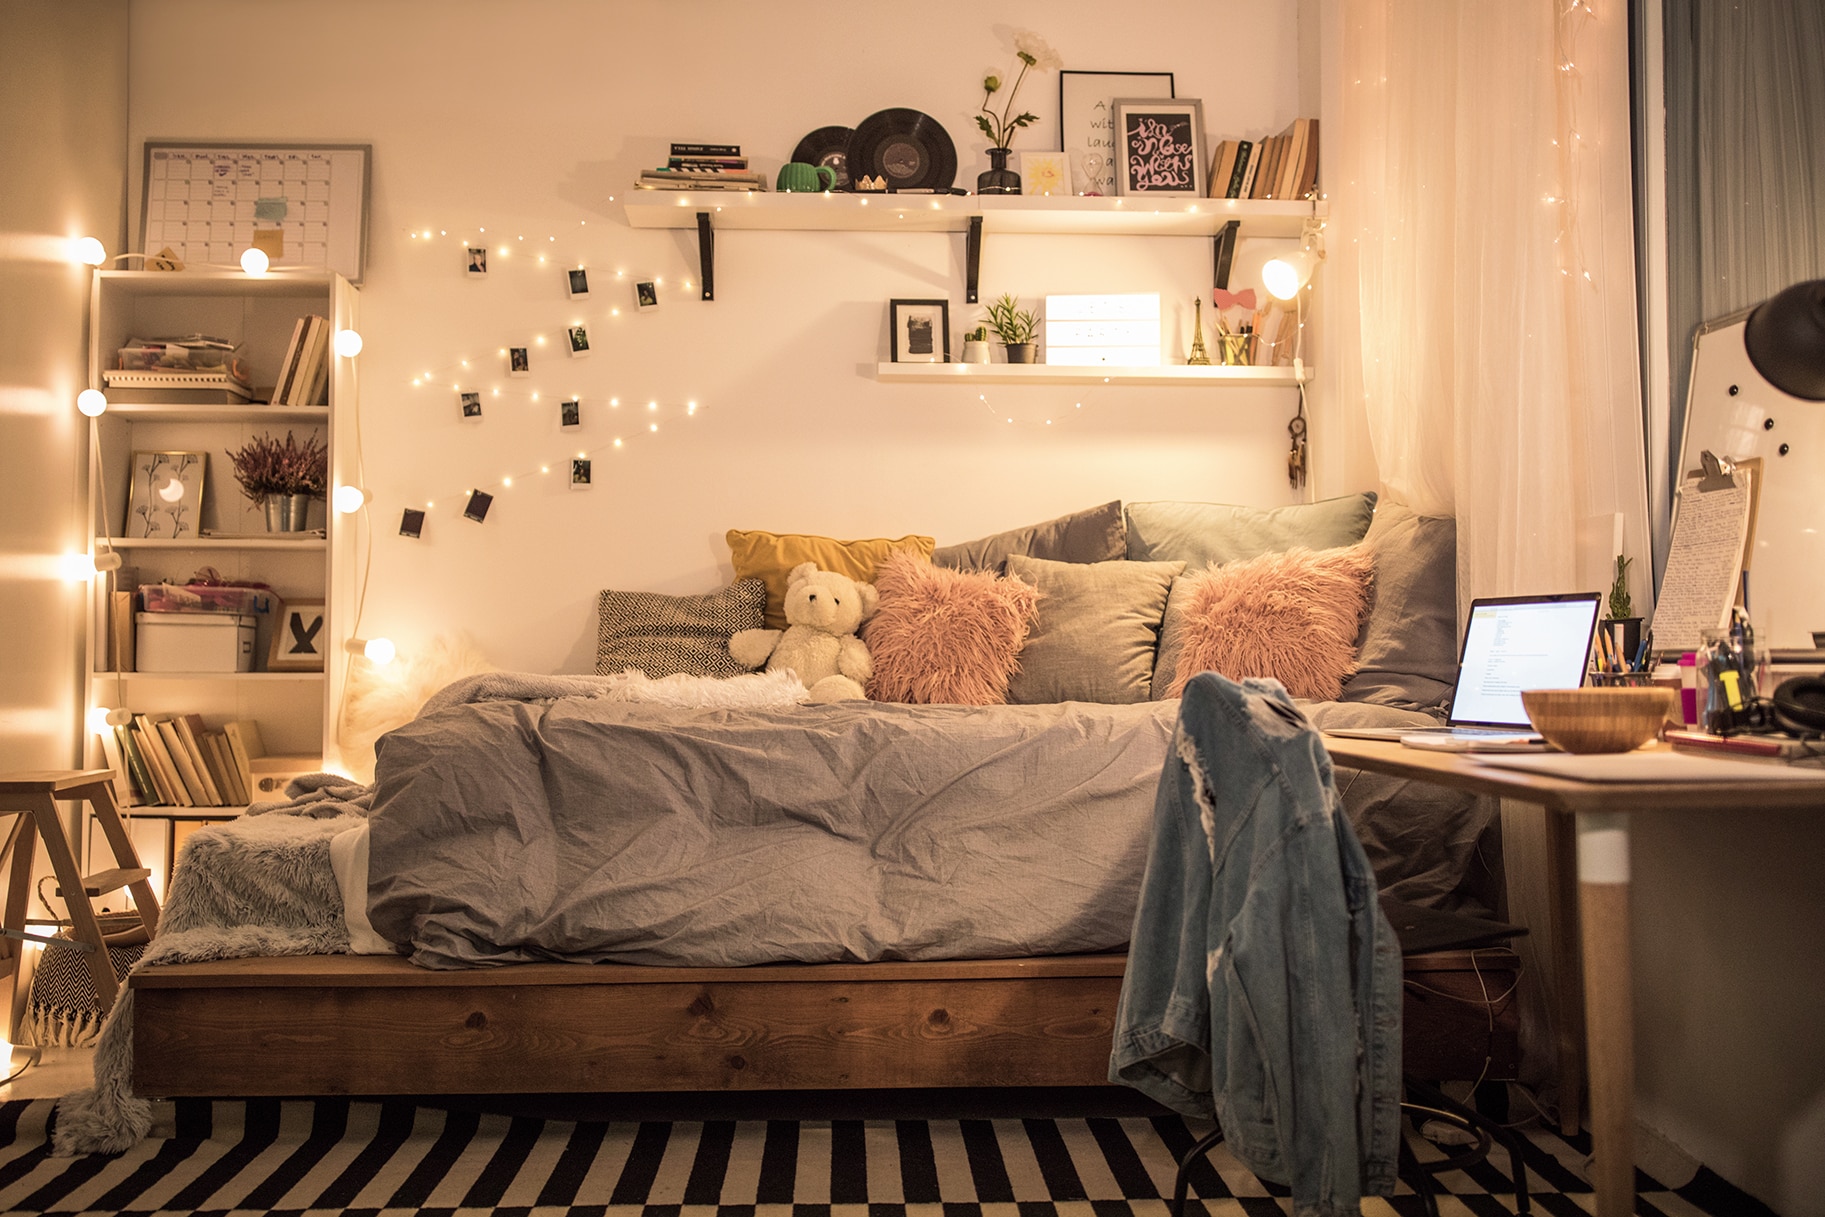 Stylish, Sophisticated Ways to Decorate a Dorm Room | Style & Living